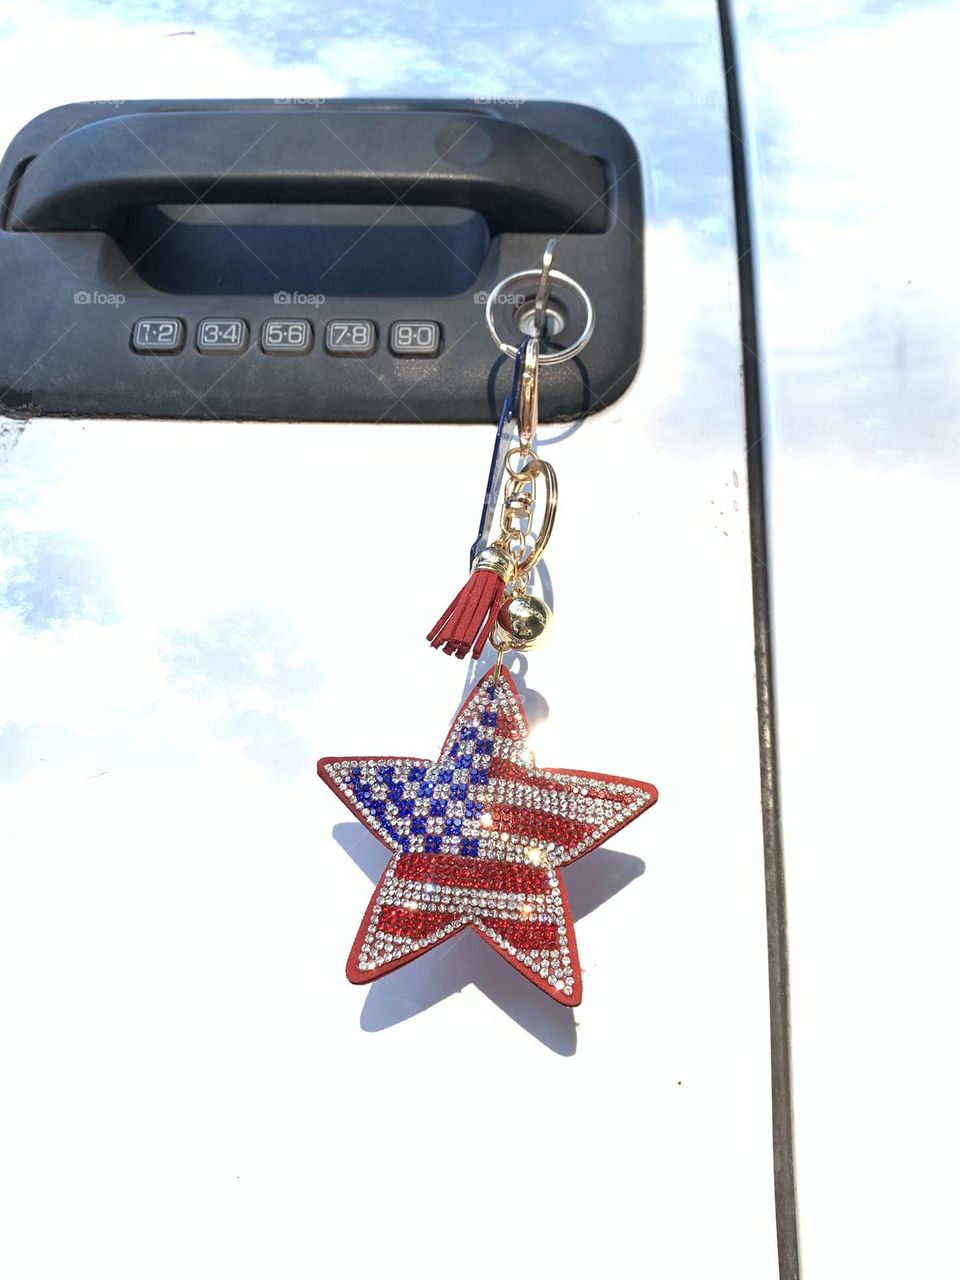 Car keychain - Popfizzy, a cute, glizy accessory for women or girls to add to their keychains, book bags, backpacks or purses. It's a perfect way to brighten up a day.